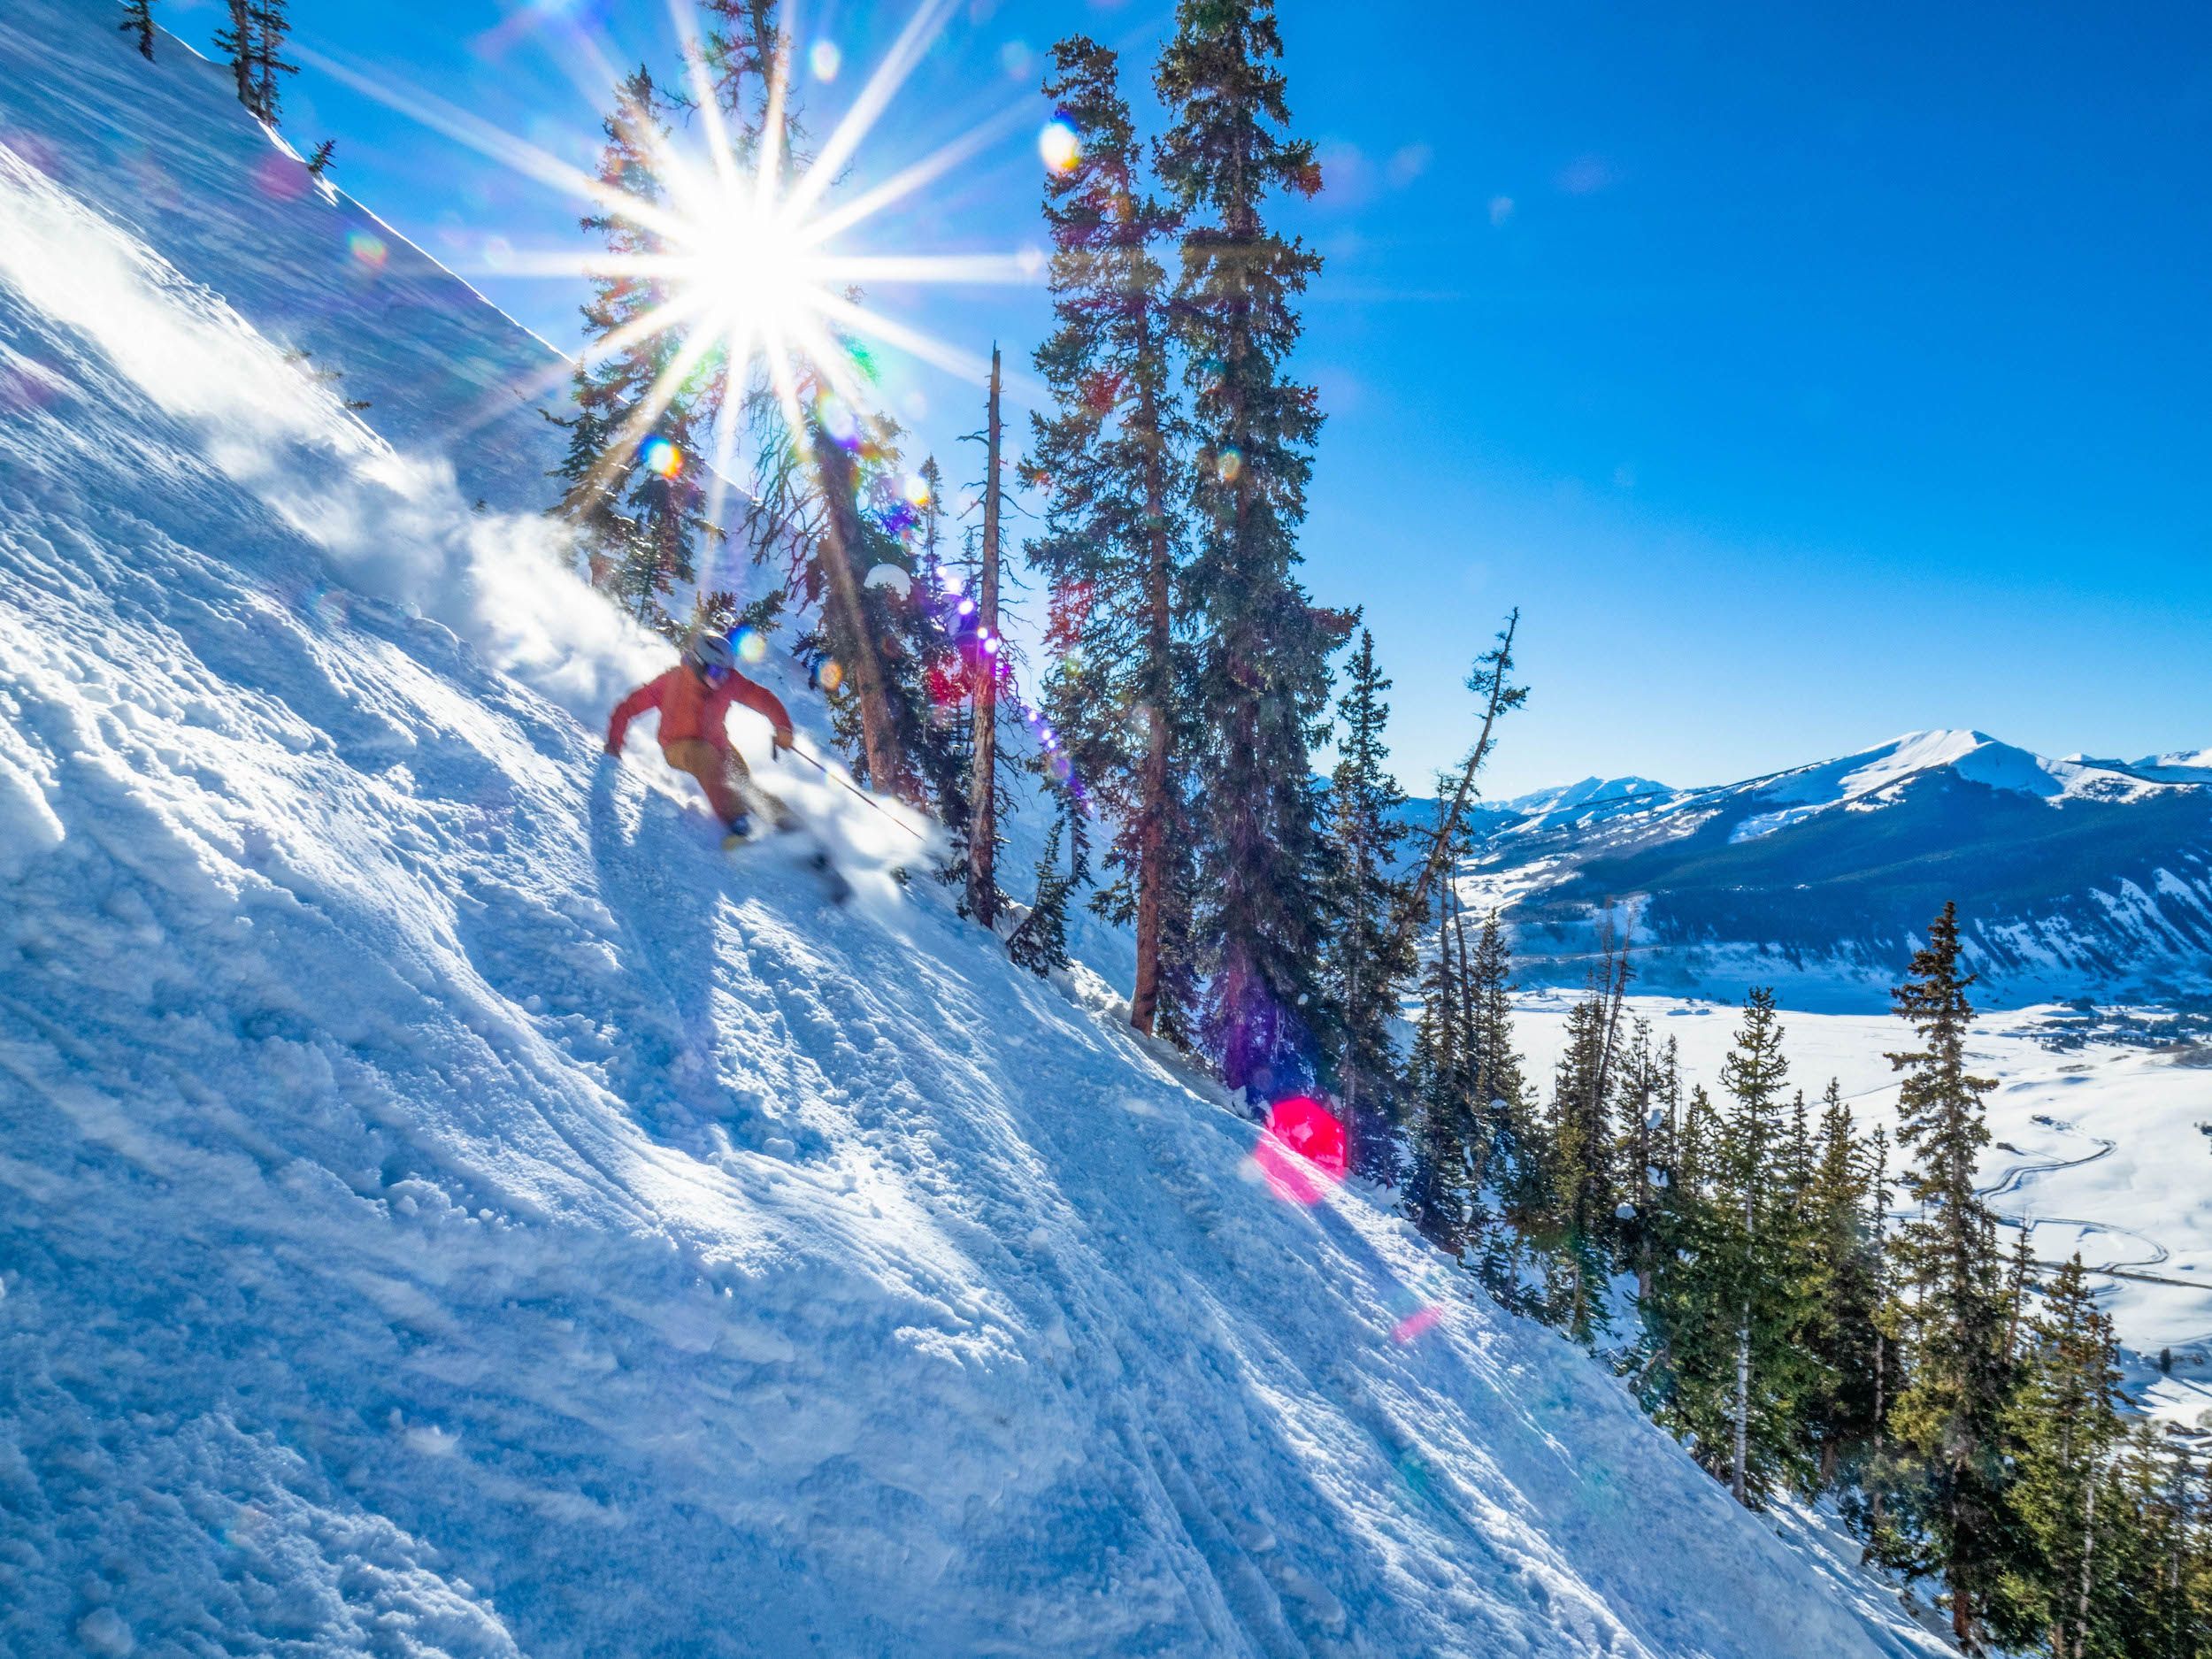 A skier rides down a steep slope with trees and mountain peaks in the background.